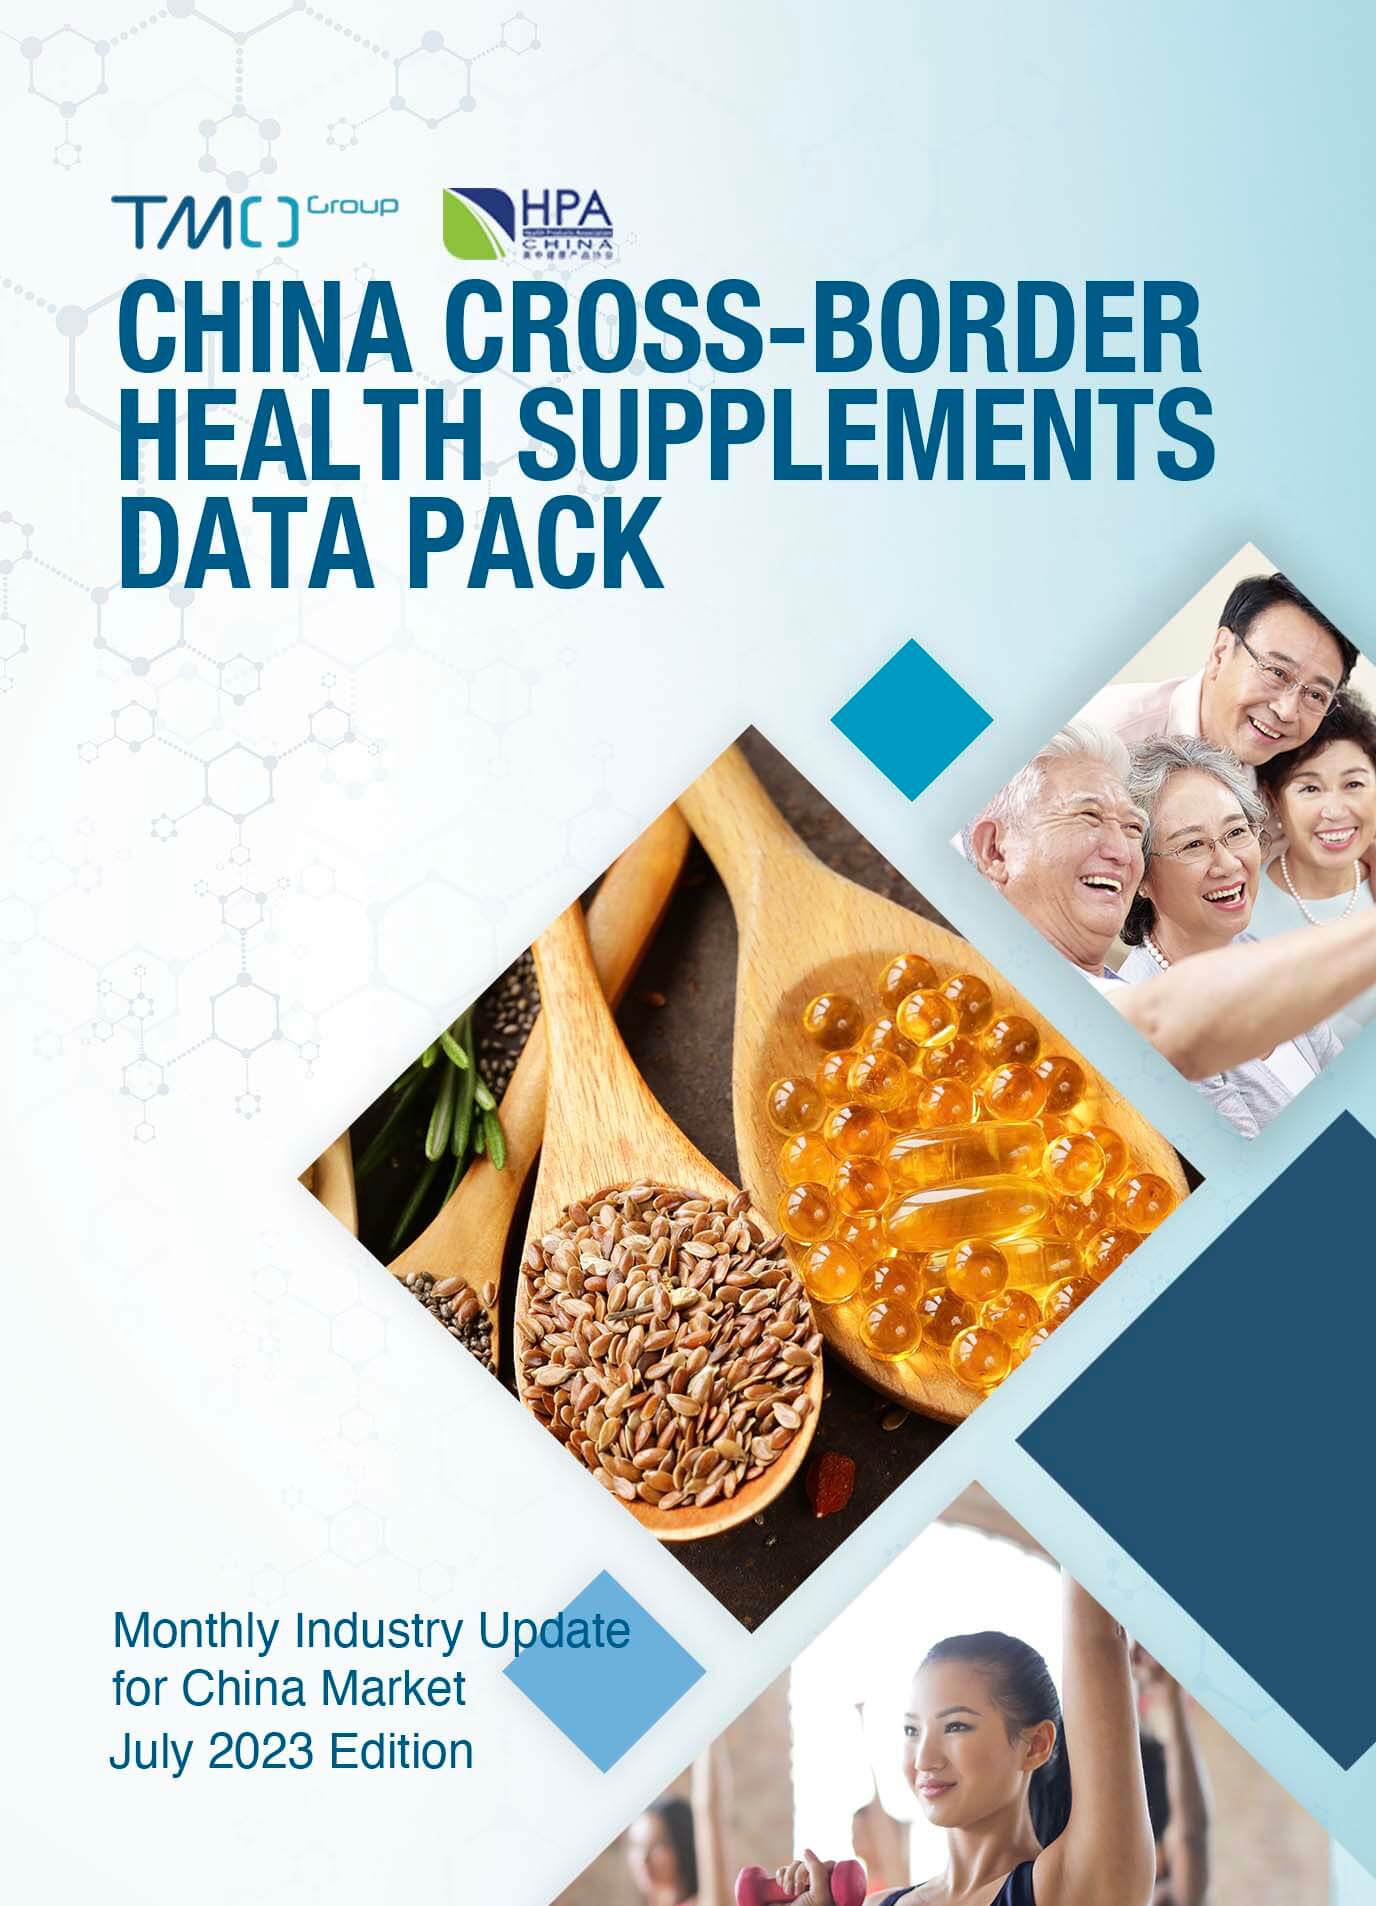 China Cross-border Health Supplements Data Pack 202307 Cover2